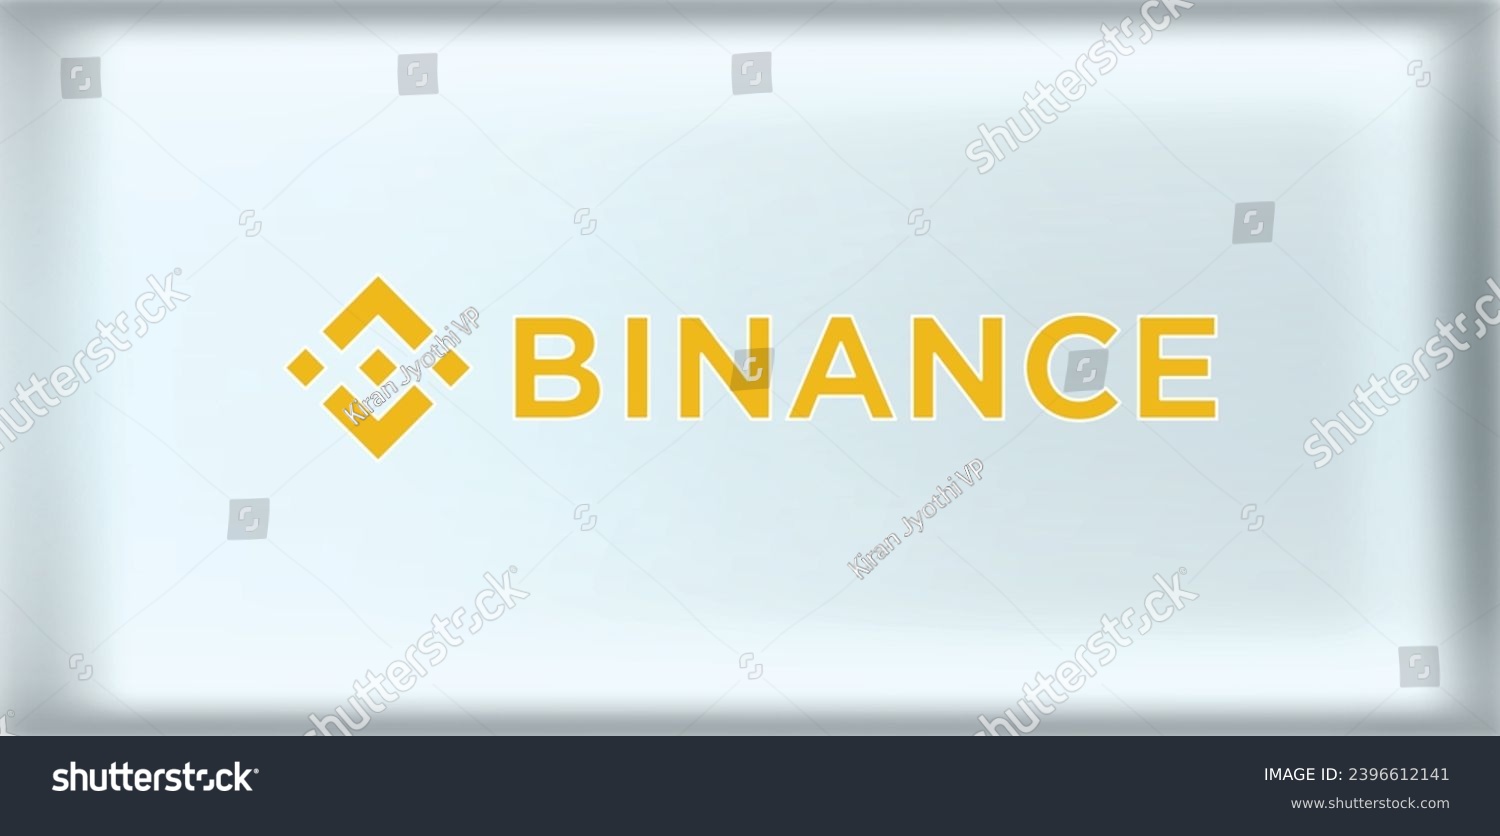 SVG of Binance Coin BNB cryptocurrency logo vector illustration, Decentralized blockchain illustration, branding, websites, mobile apps, and marketing collateral svg